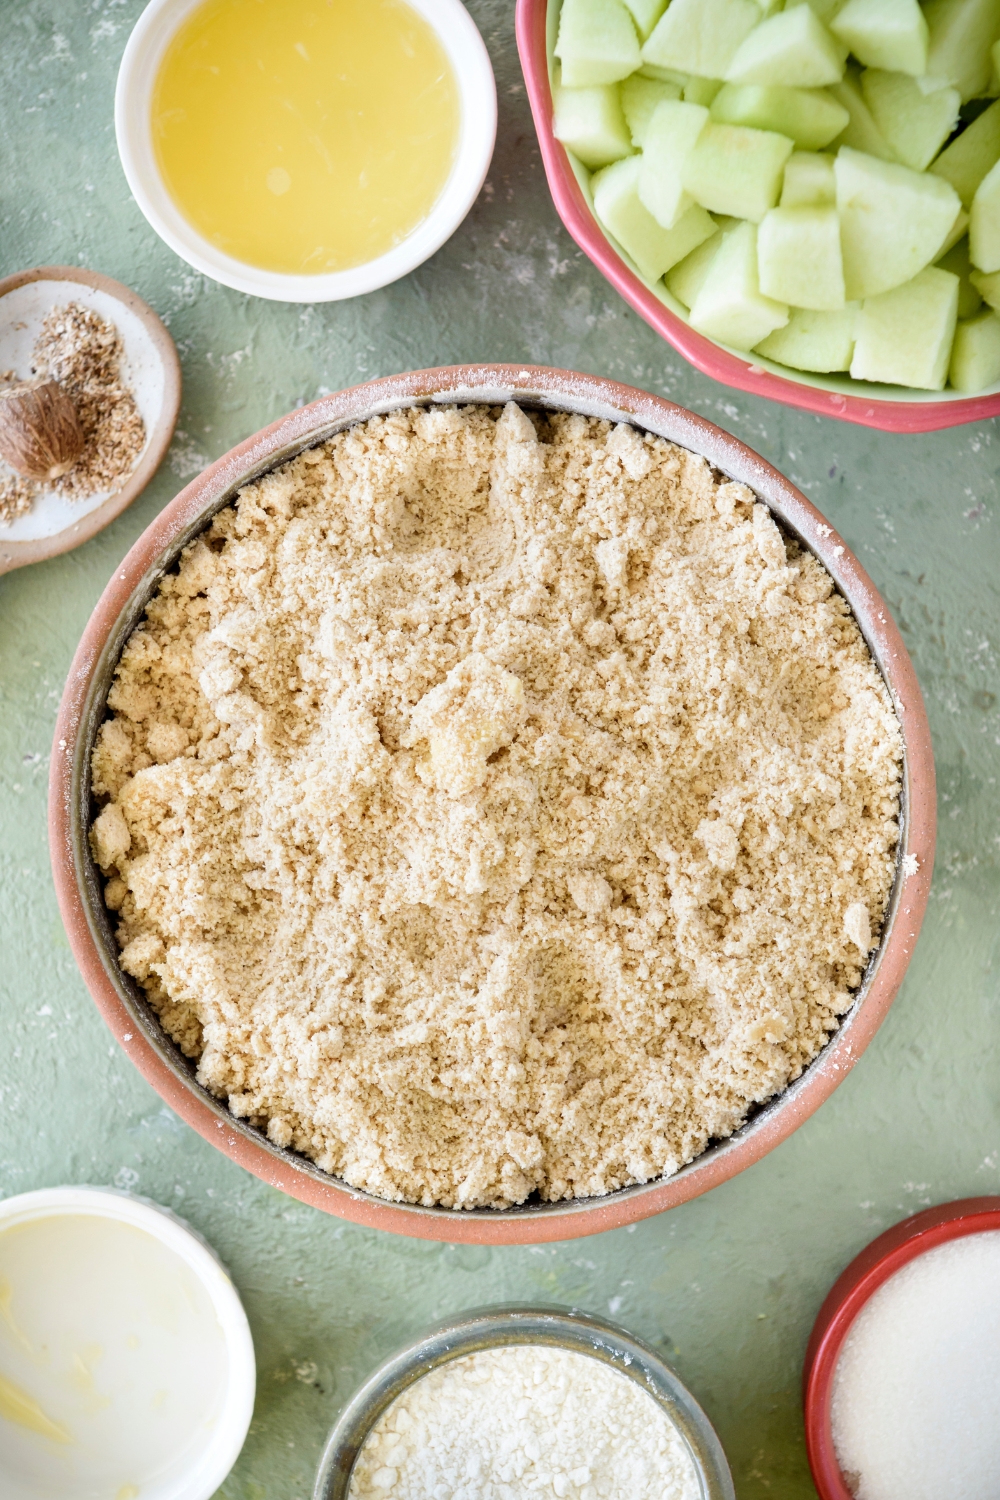 A bowl filled with a crumbly mixture that is surrounded by an assortment of ingredients.